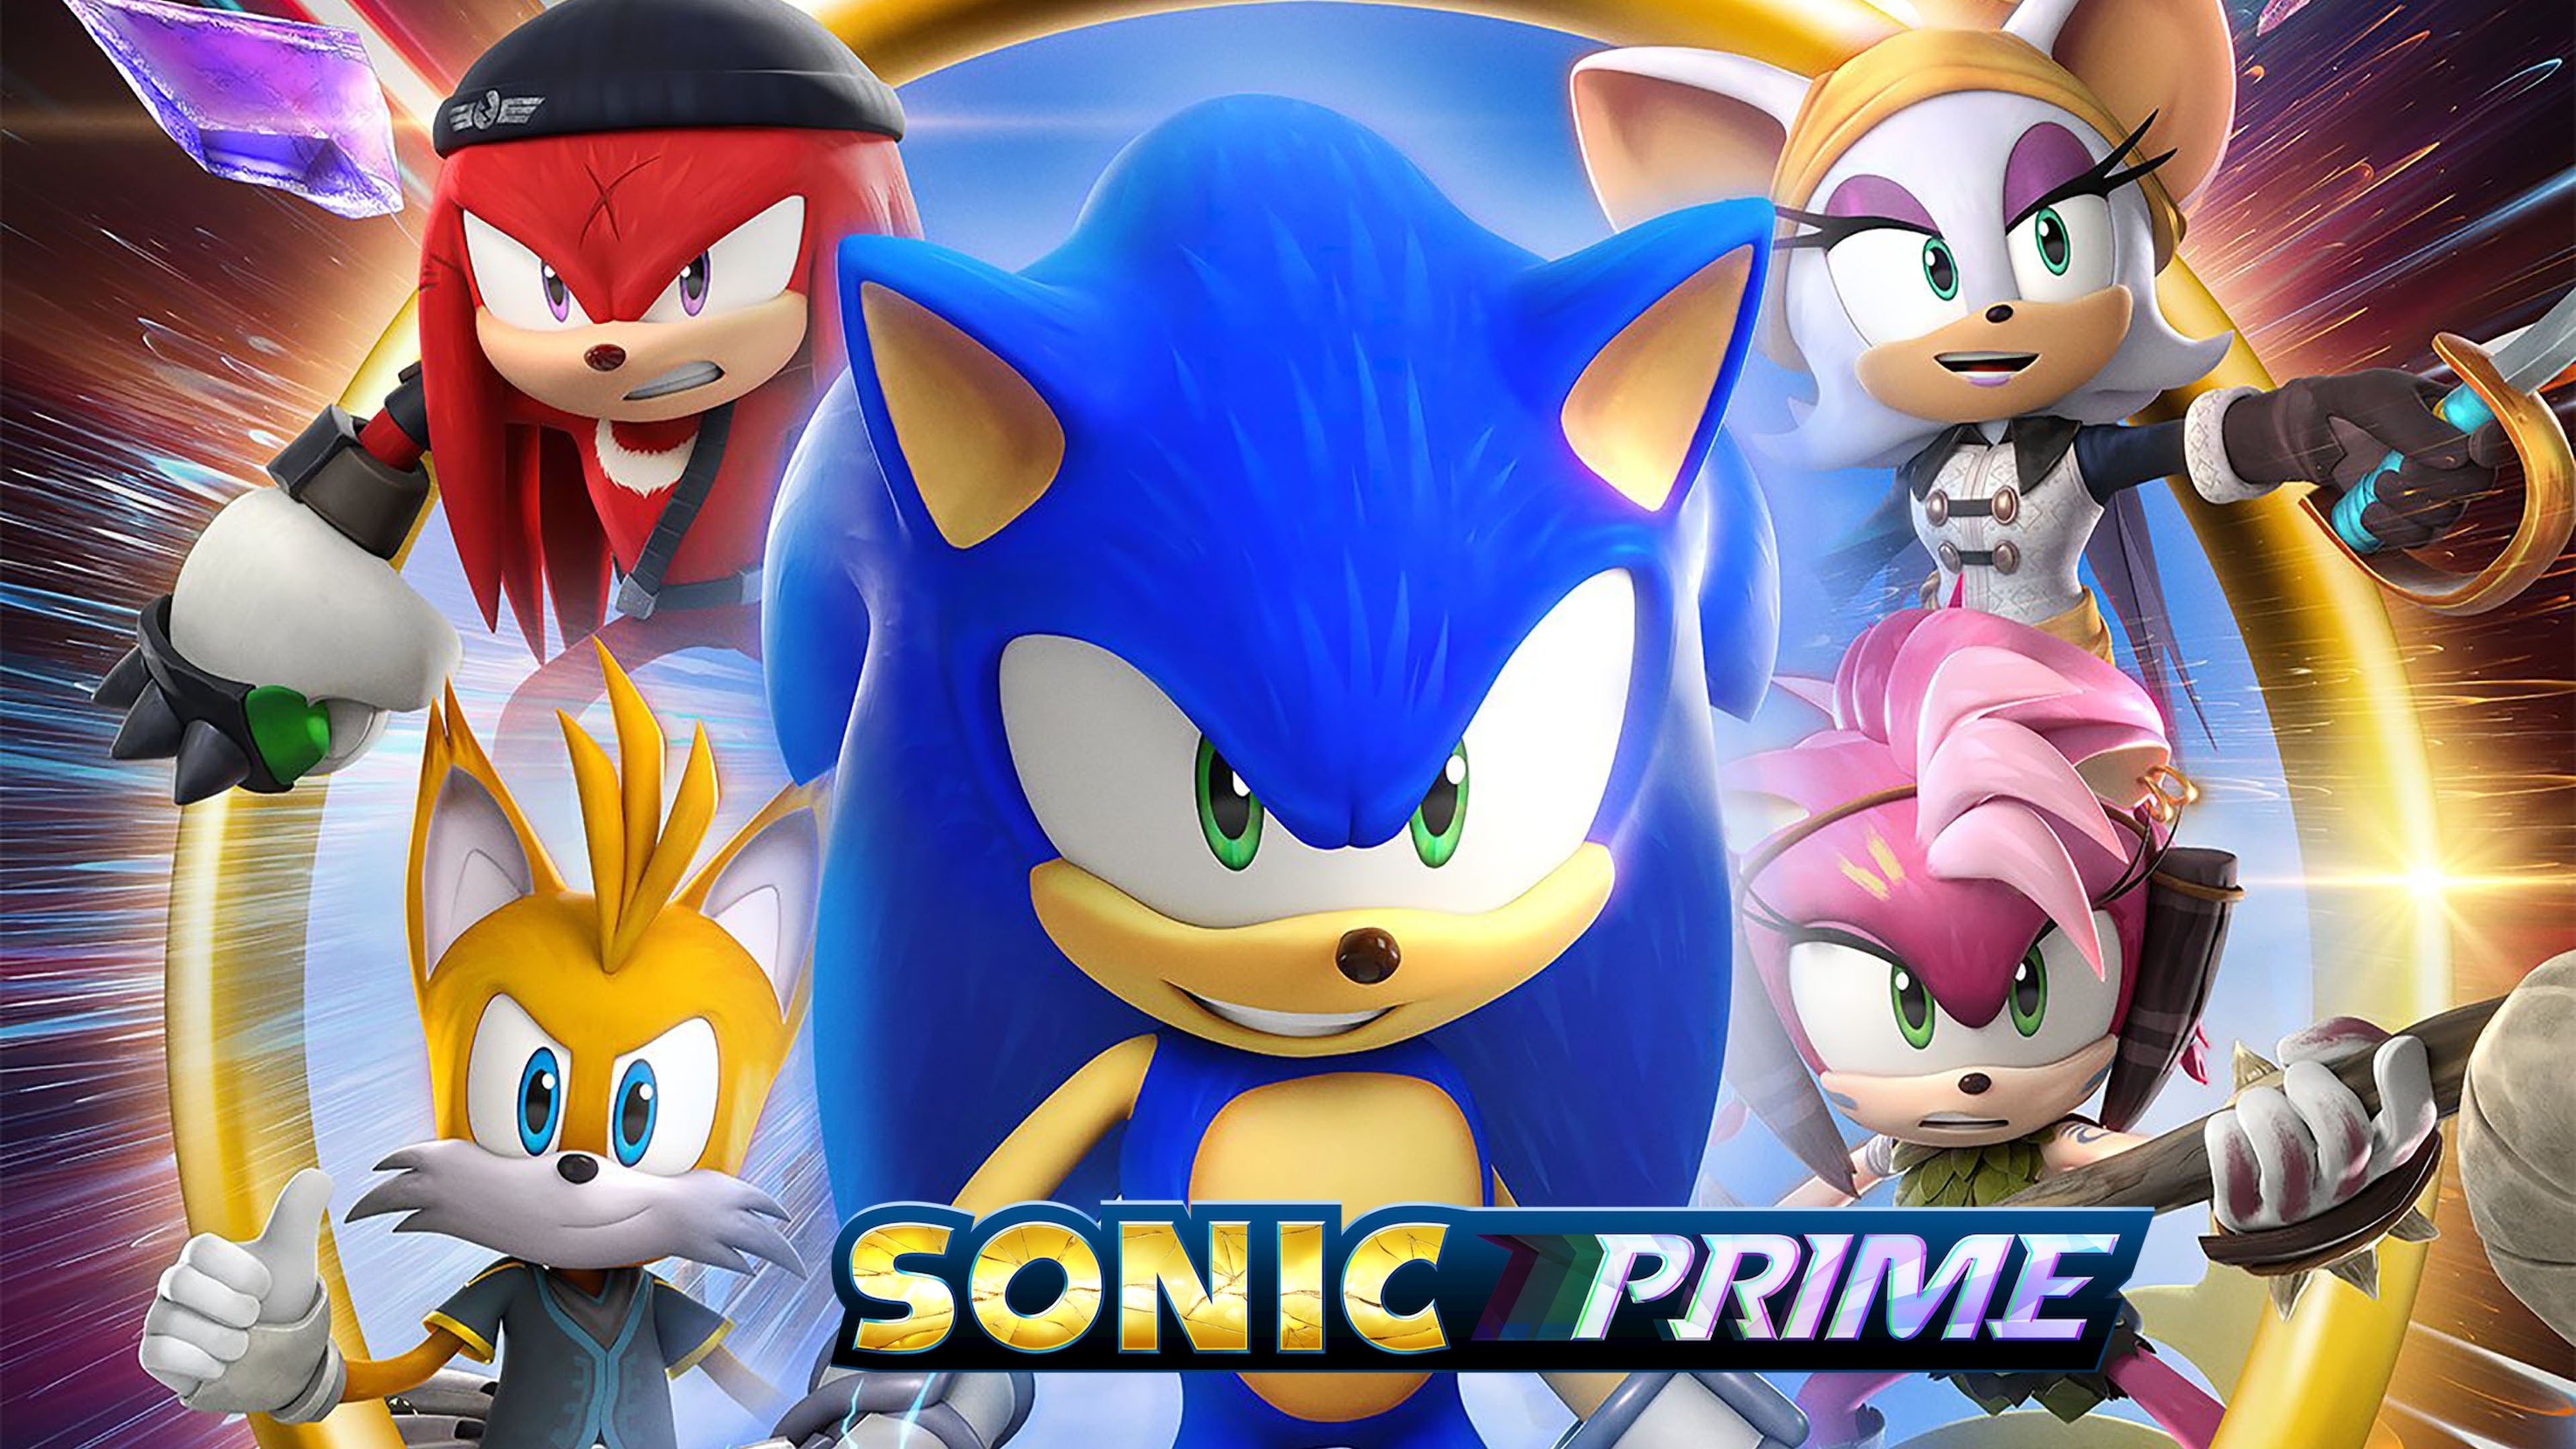 Sonic Prime Producer Says The Show Is Canon To The Main Series